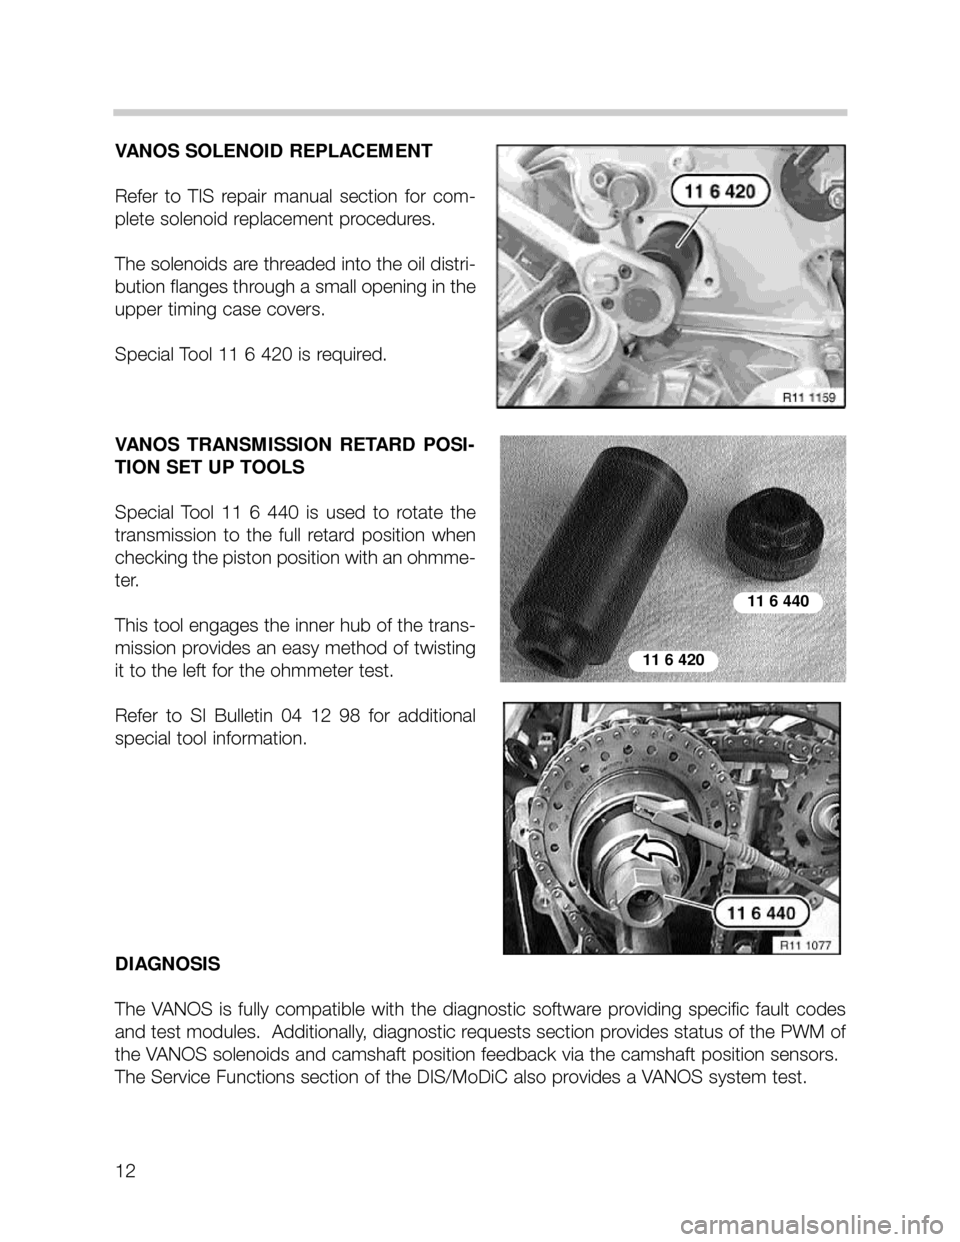 BMW X5 2001 E53 M62TU Engine Workshop Manual 12
VANOS SOLENOID REPLACEMENT
Refer  to  TIS  repair  manual  section  for  com-
plete solenoid replacement procedures.  
The solenoids are threaded into the oil distri-
bution flanges through a small